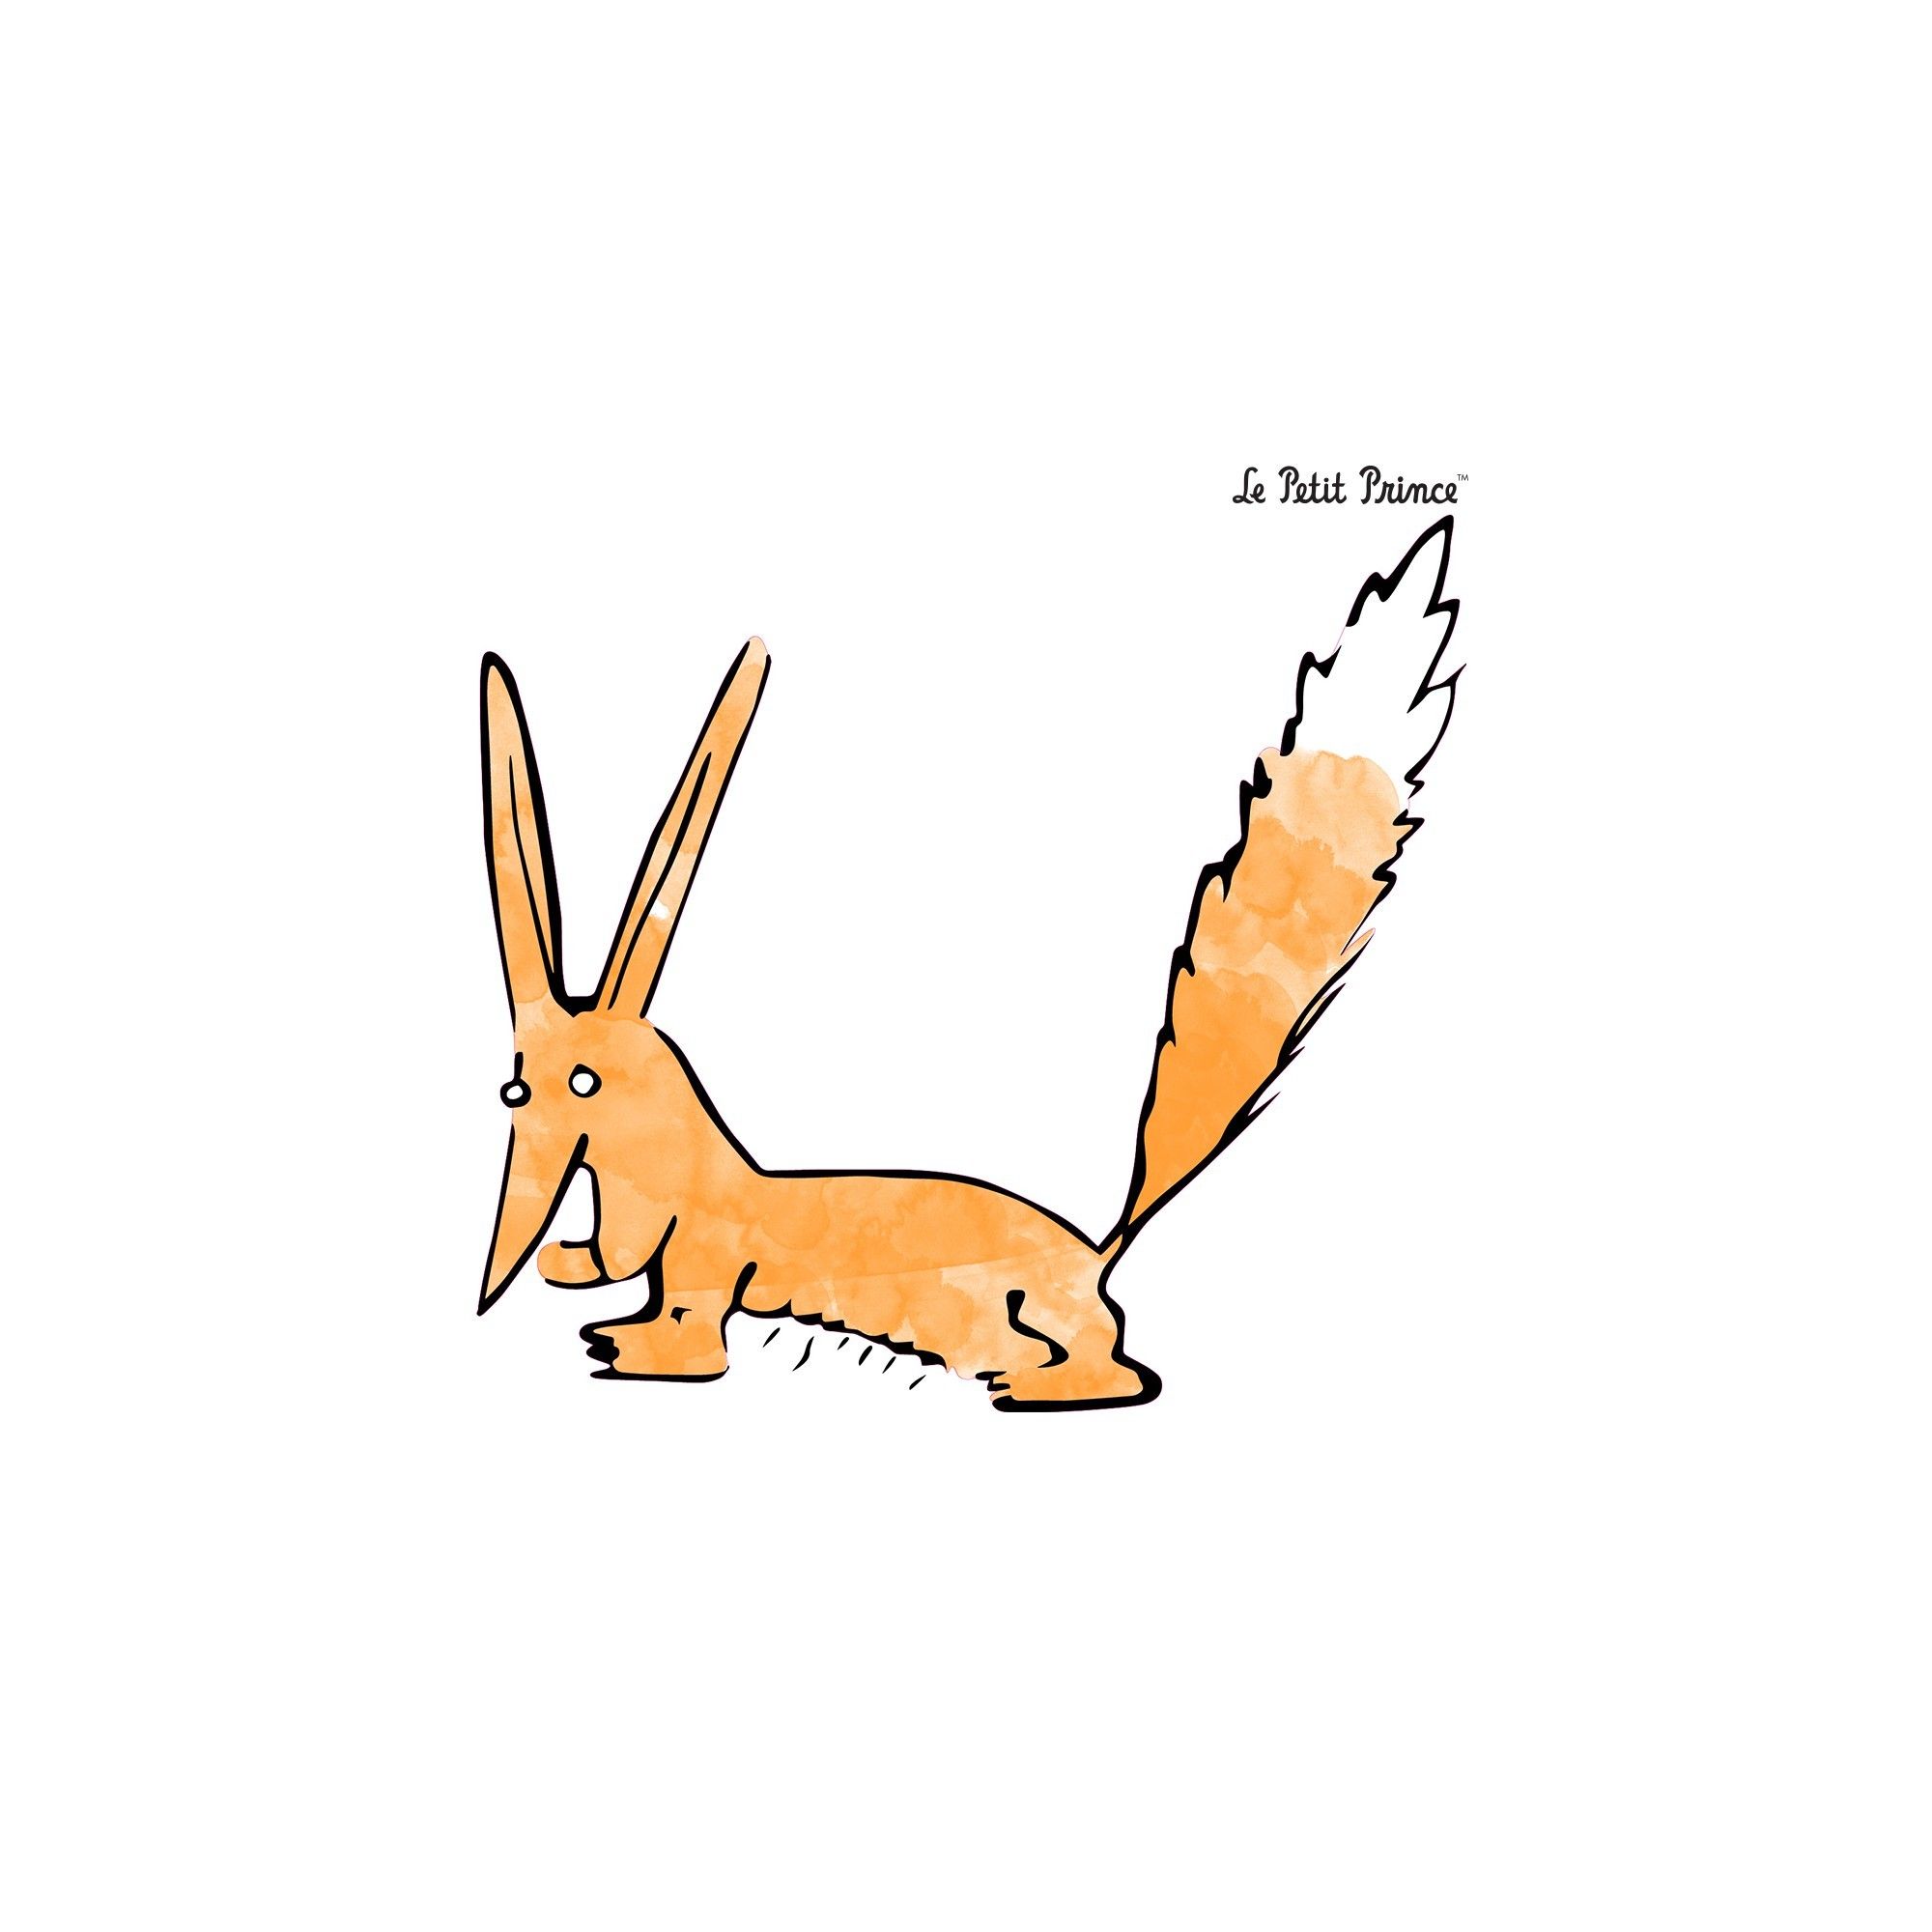 Le Petit Prince: What does the fox say?